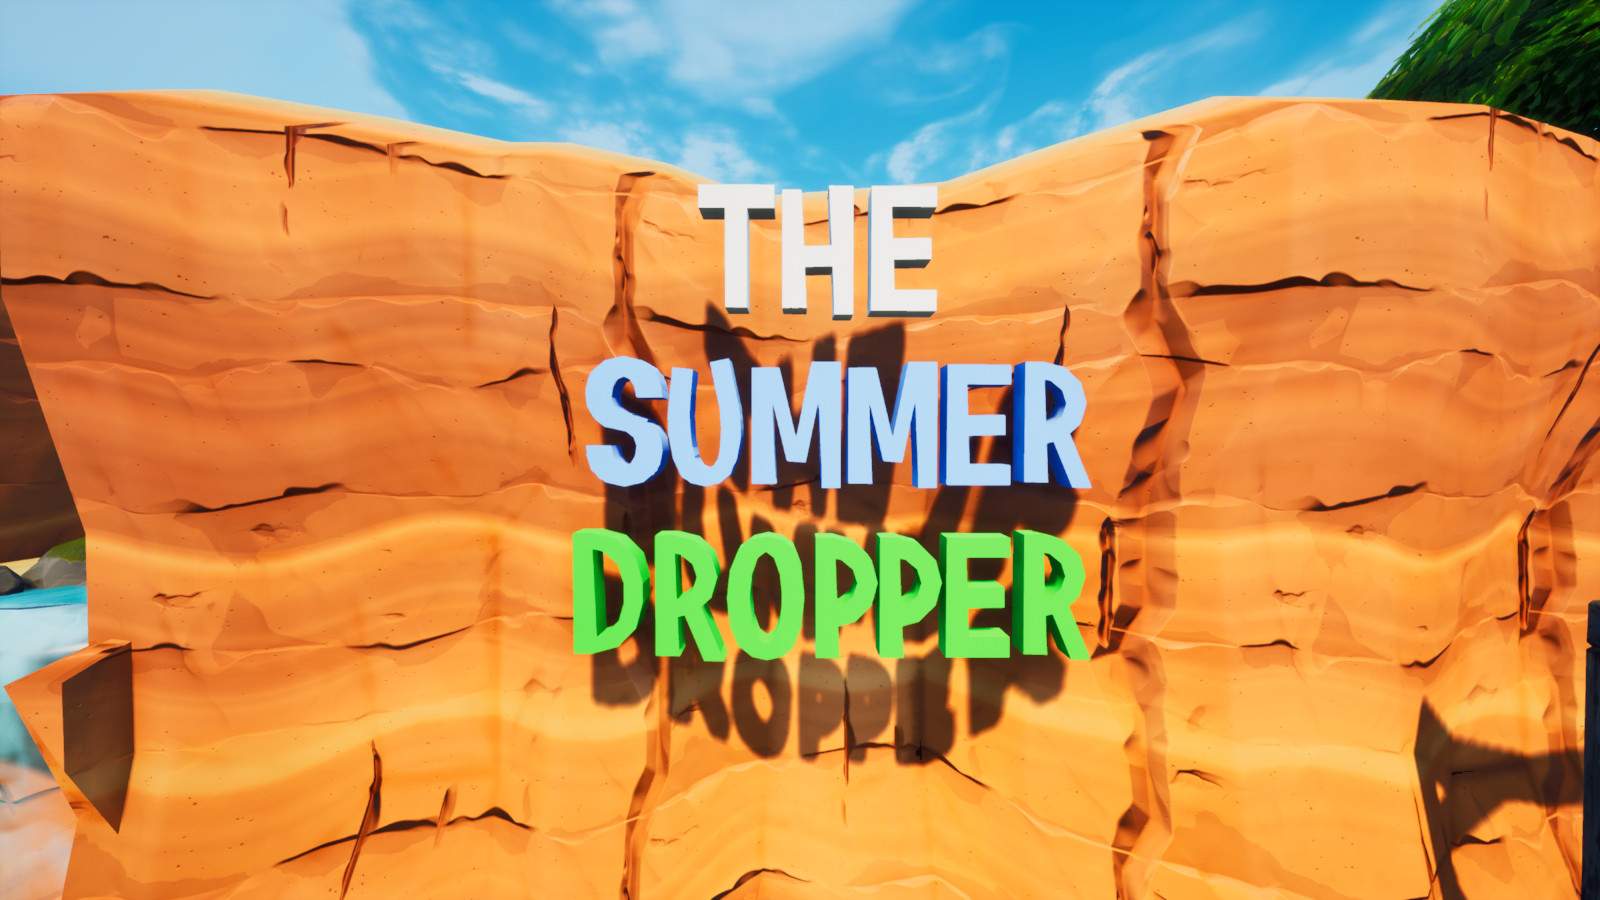 THE SUMMER DROPPER